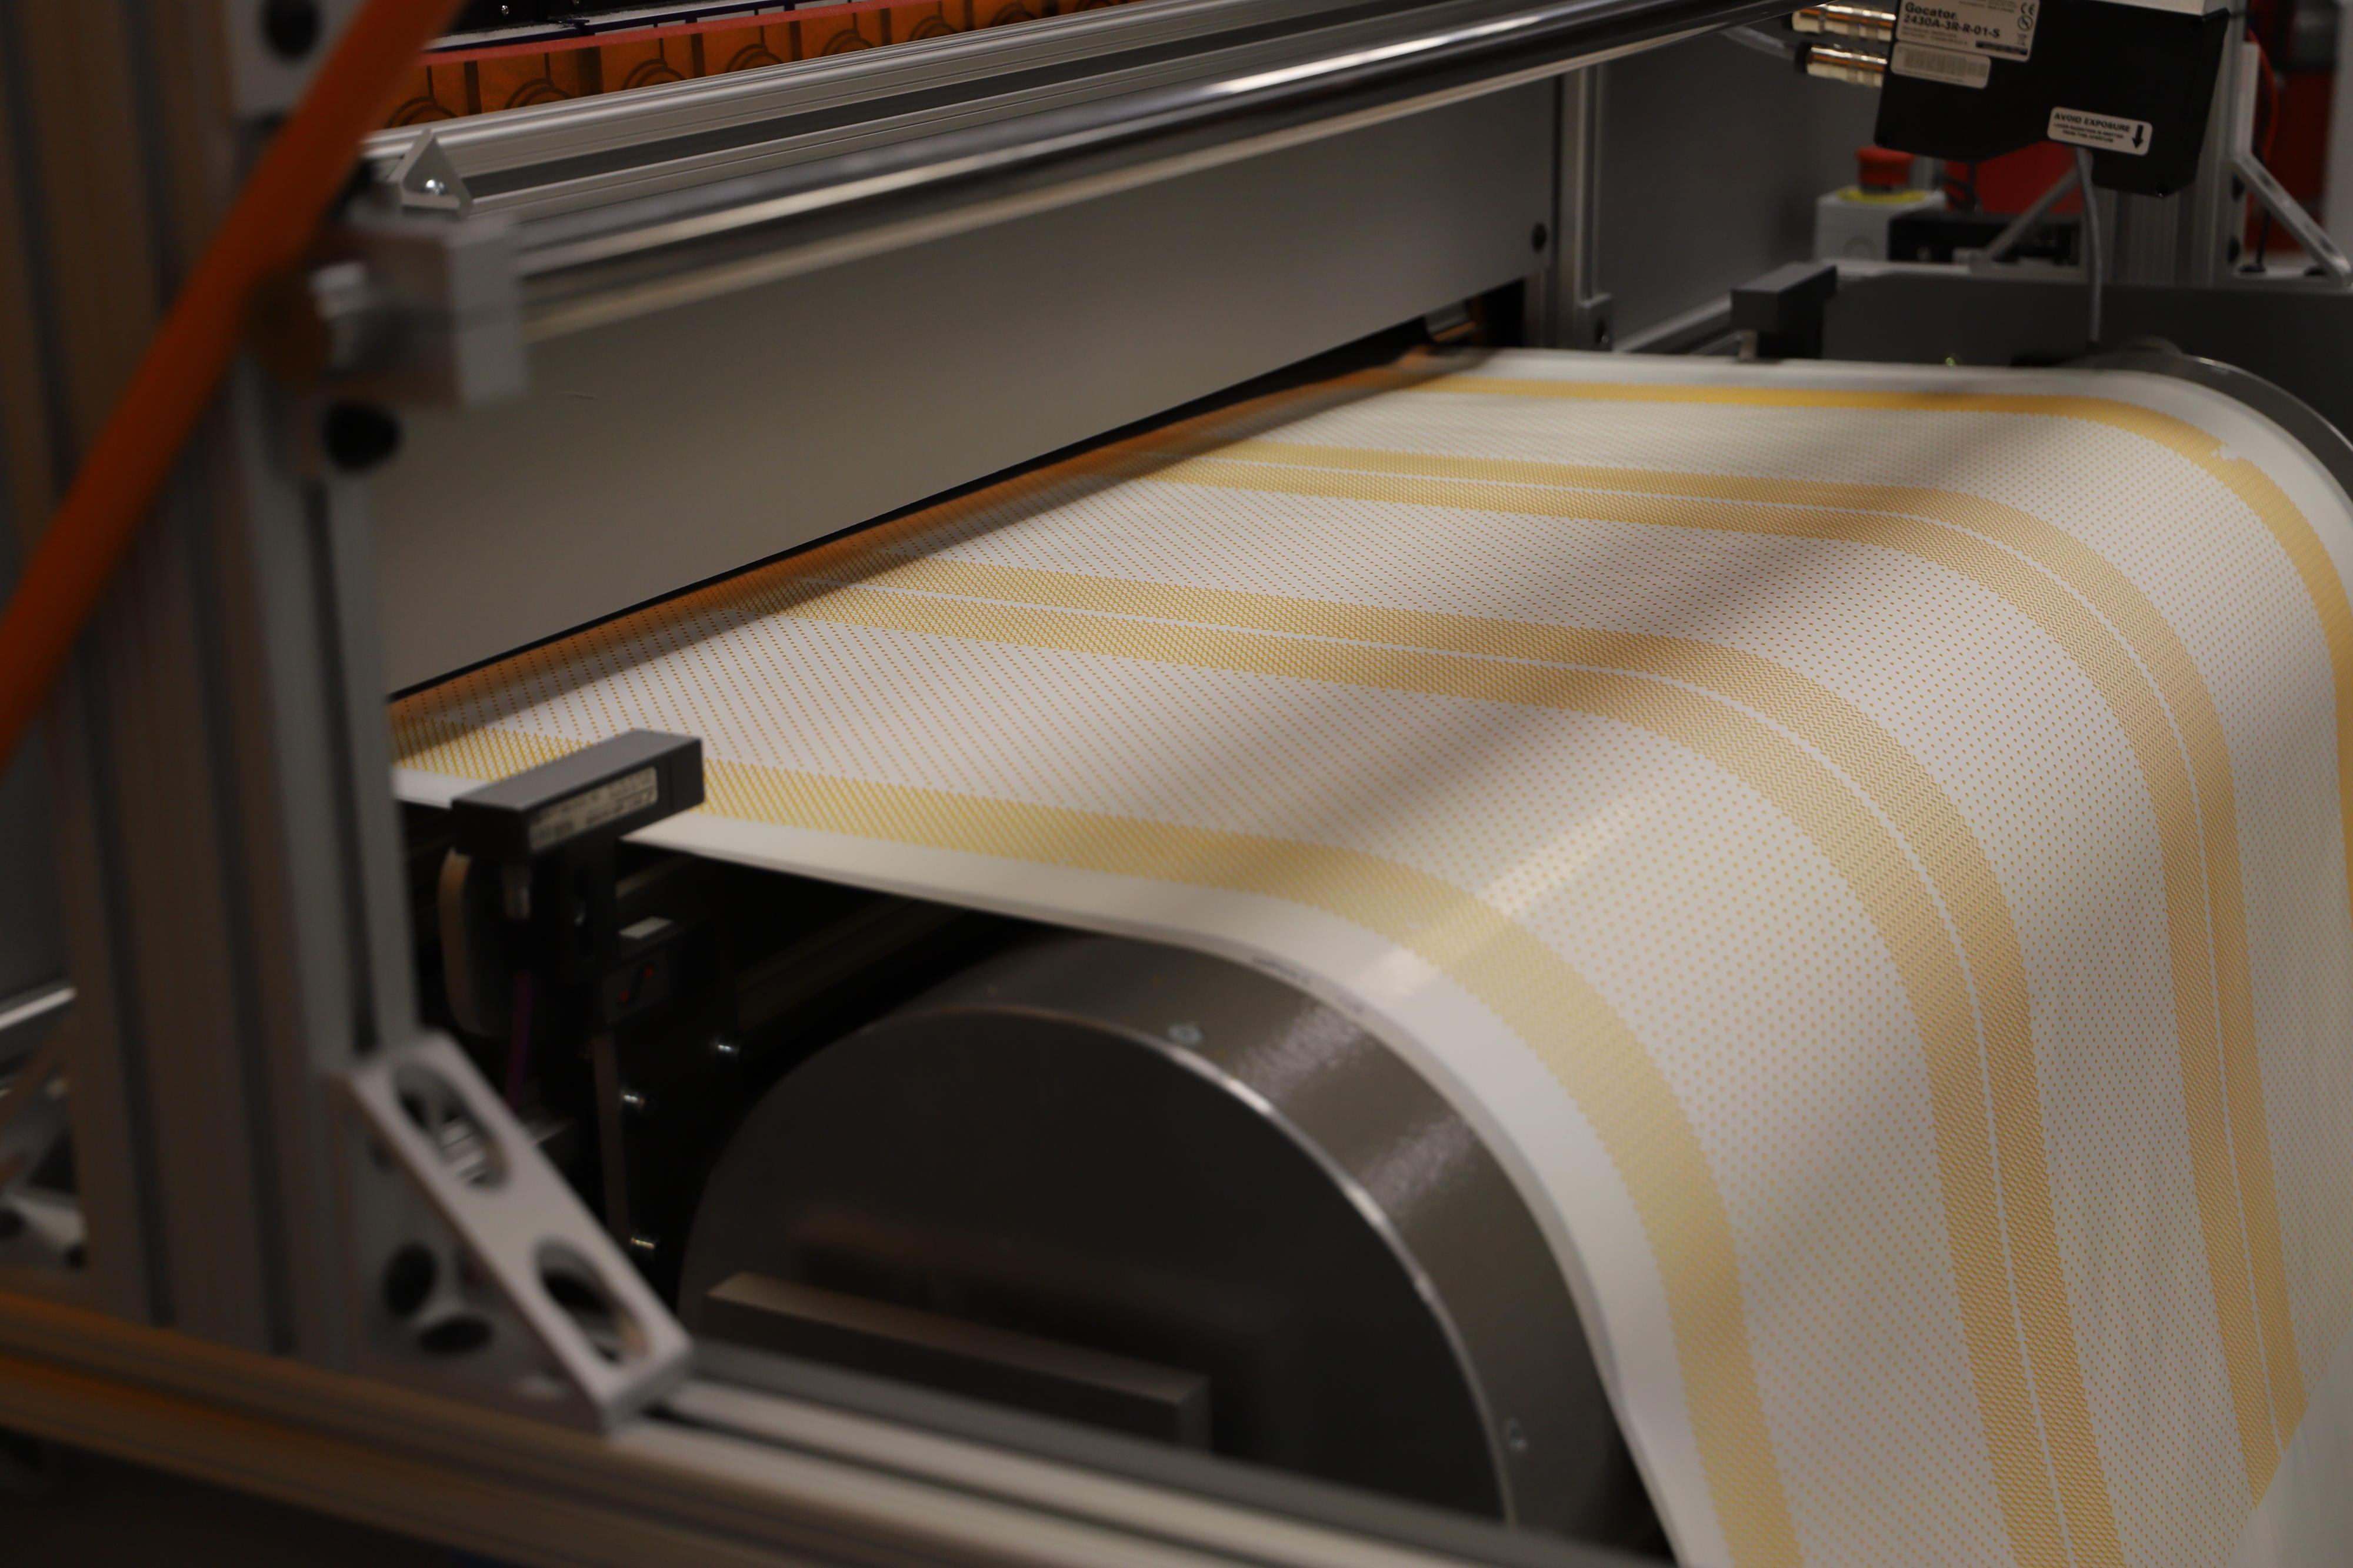 The automated system prints the feed spacer directly on to the flat sheet web.